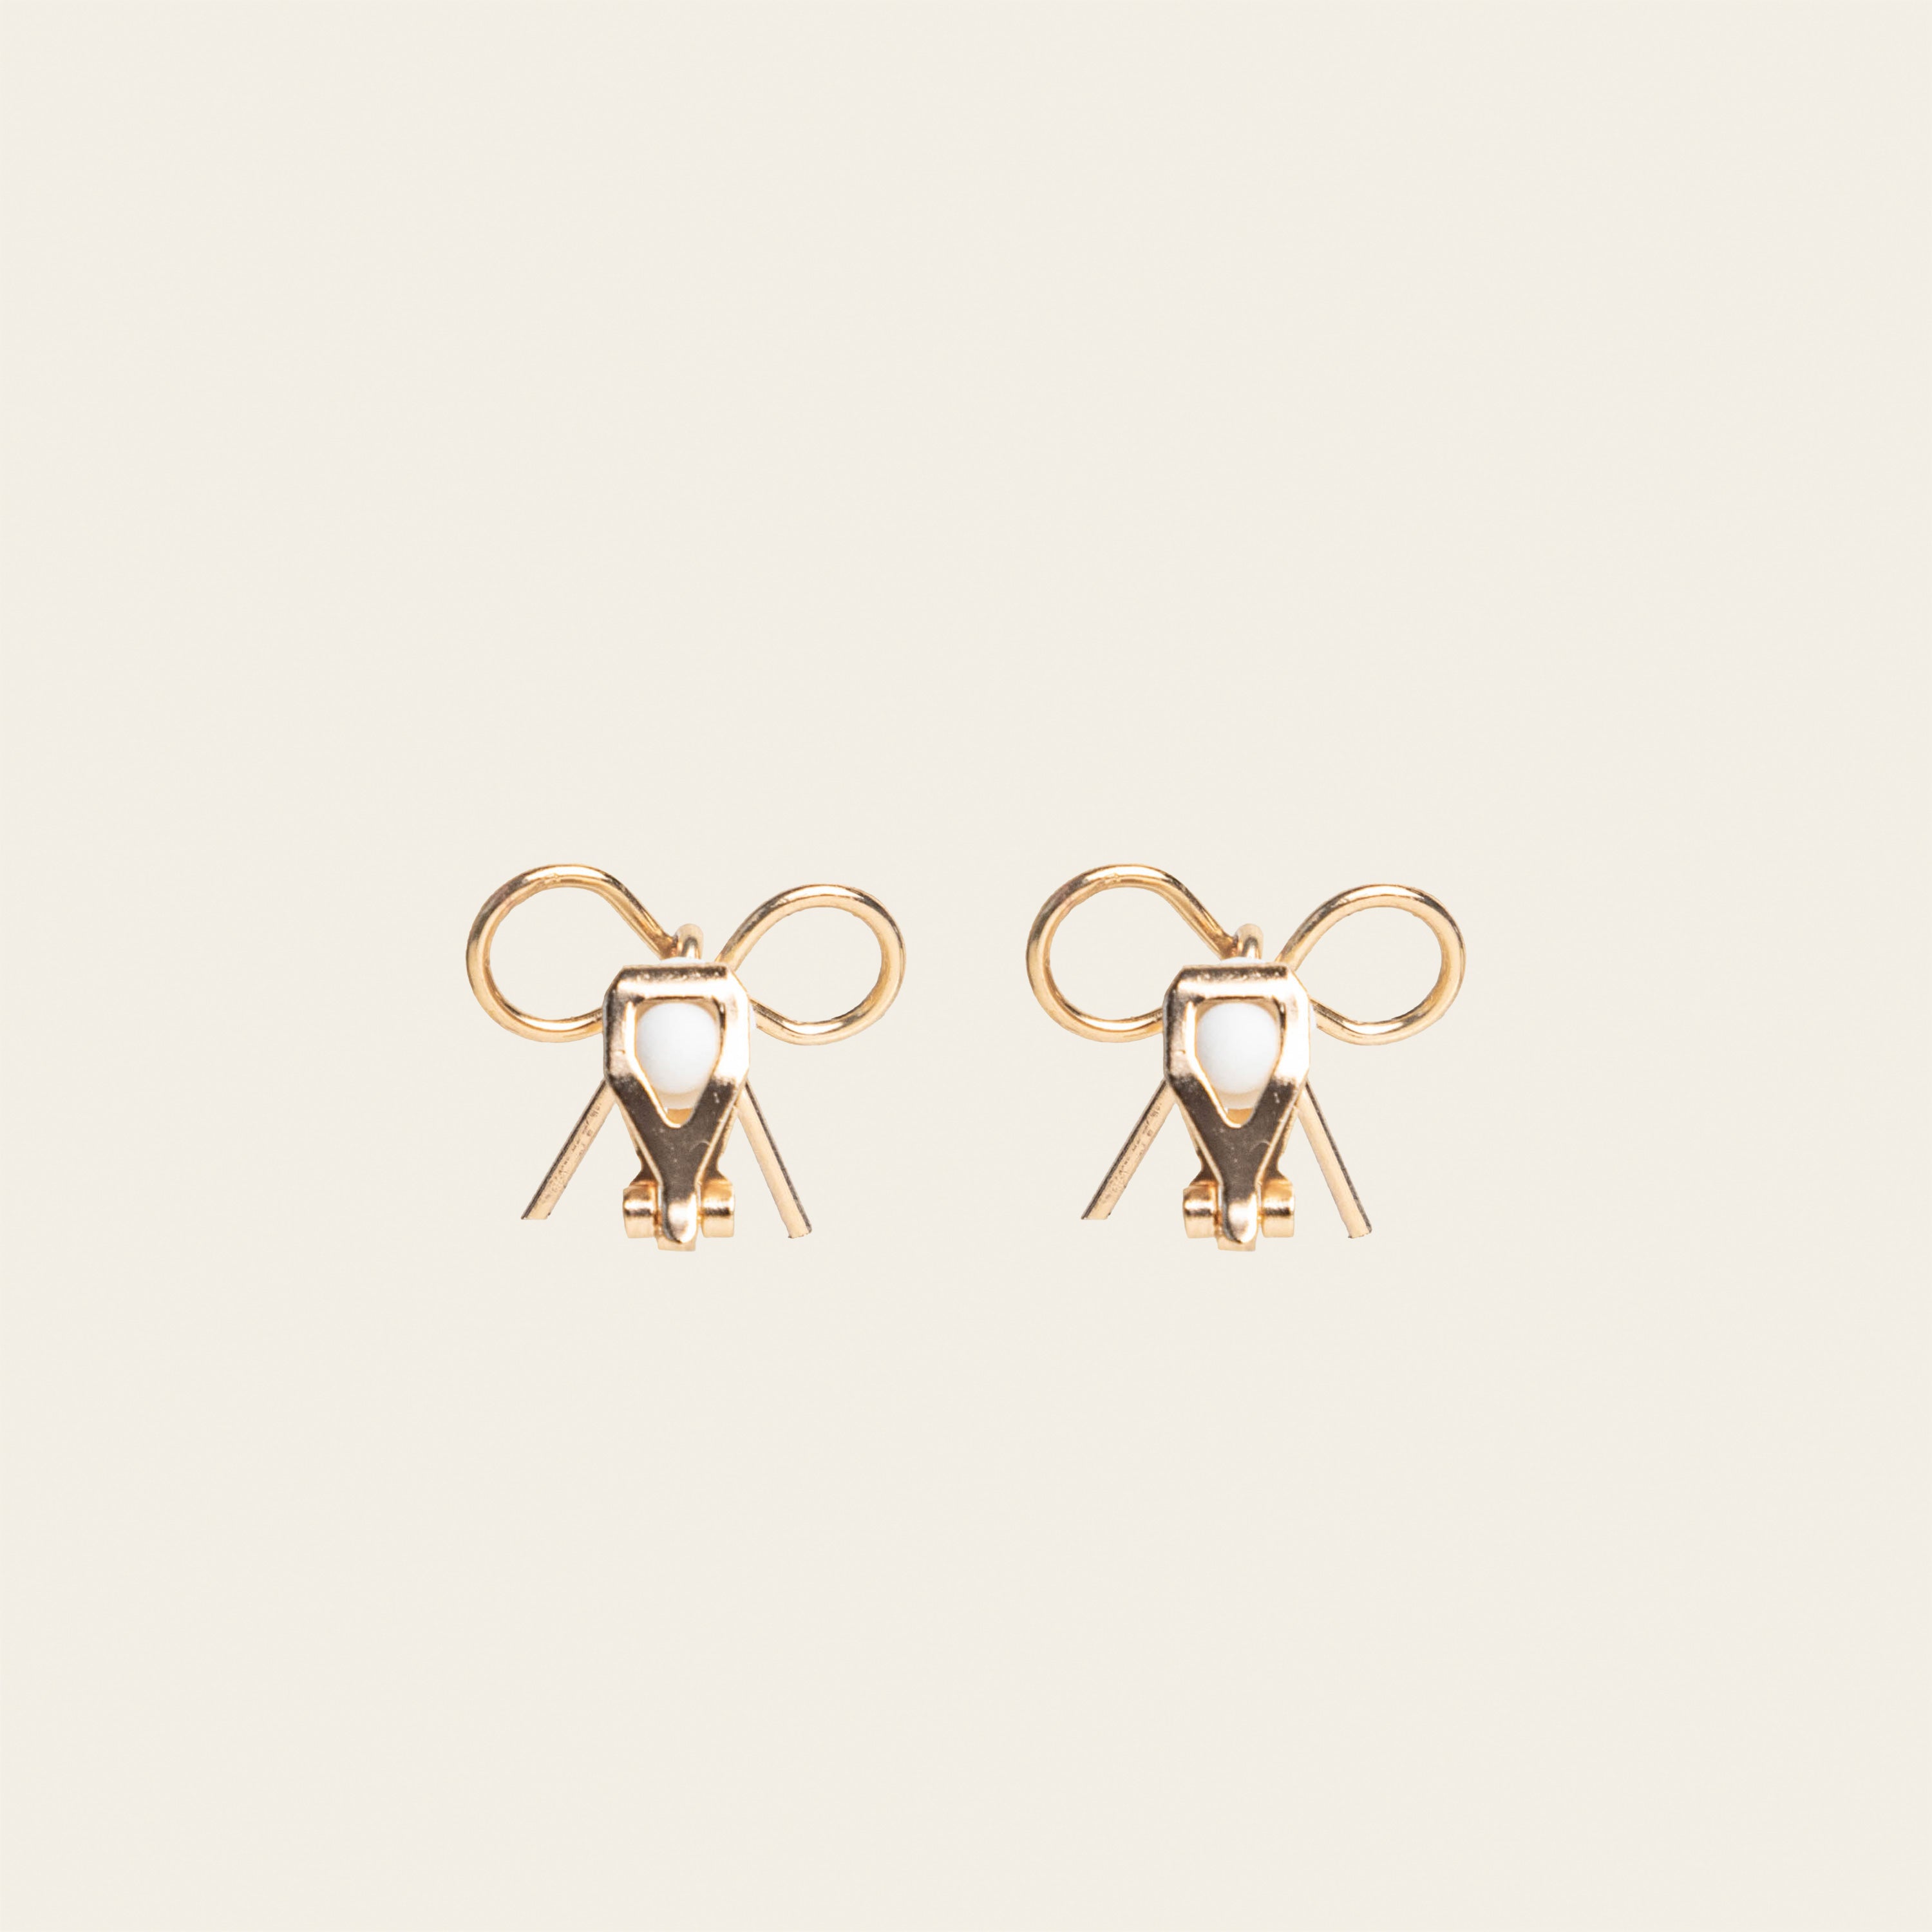 Image of the Celia Clip On Earrings. Designed with a 24-hour hold and adjustable fit, these earrings are perfect for sensitive or stretched ears. Elevate your style with elegance and comfort.